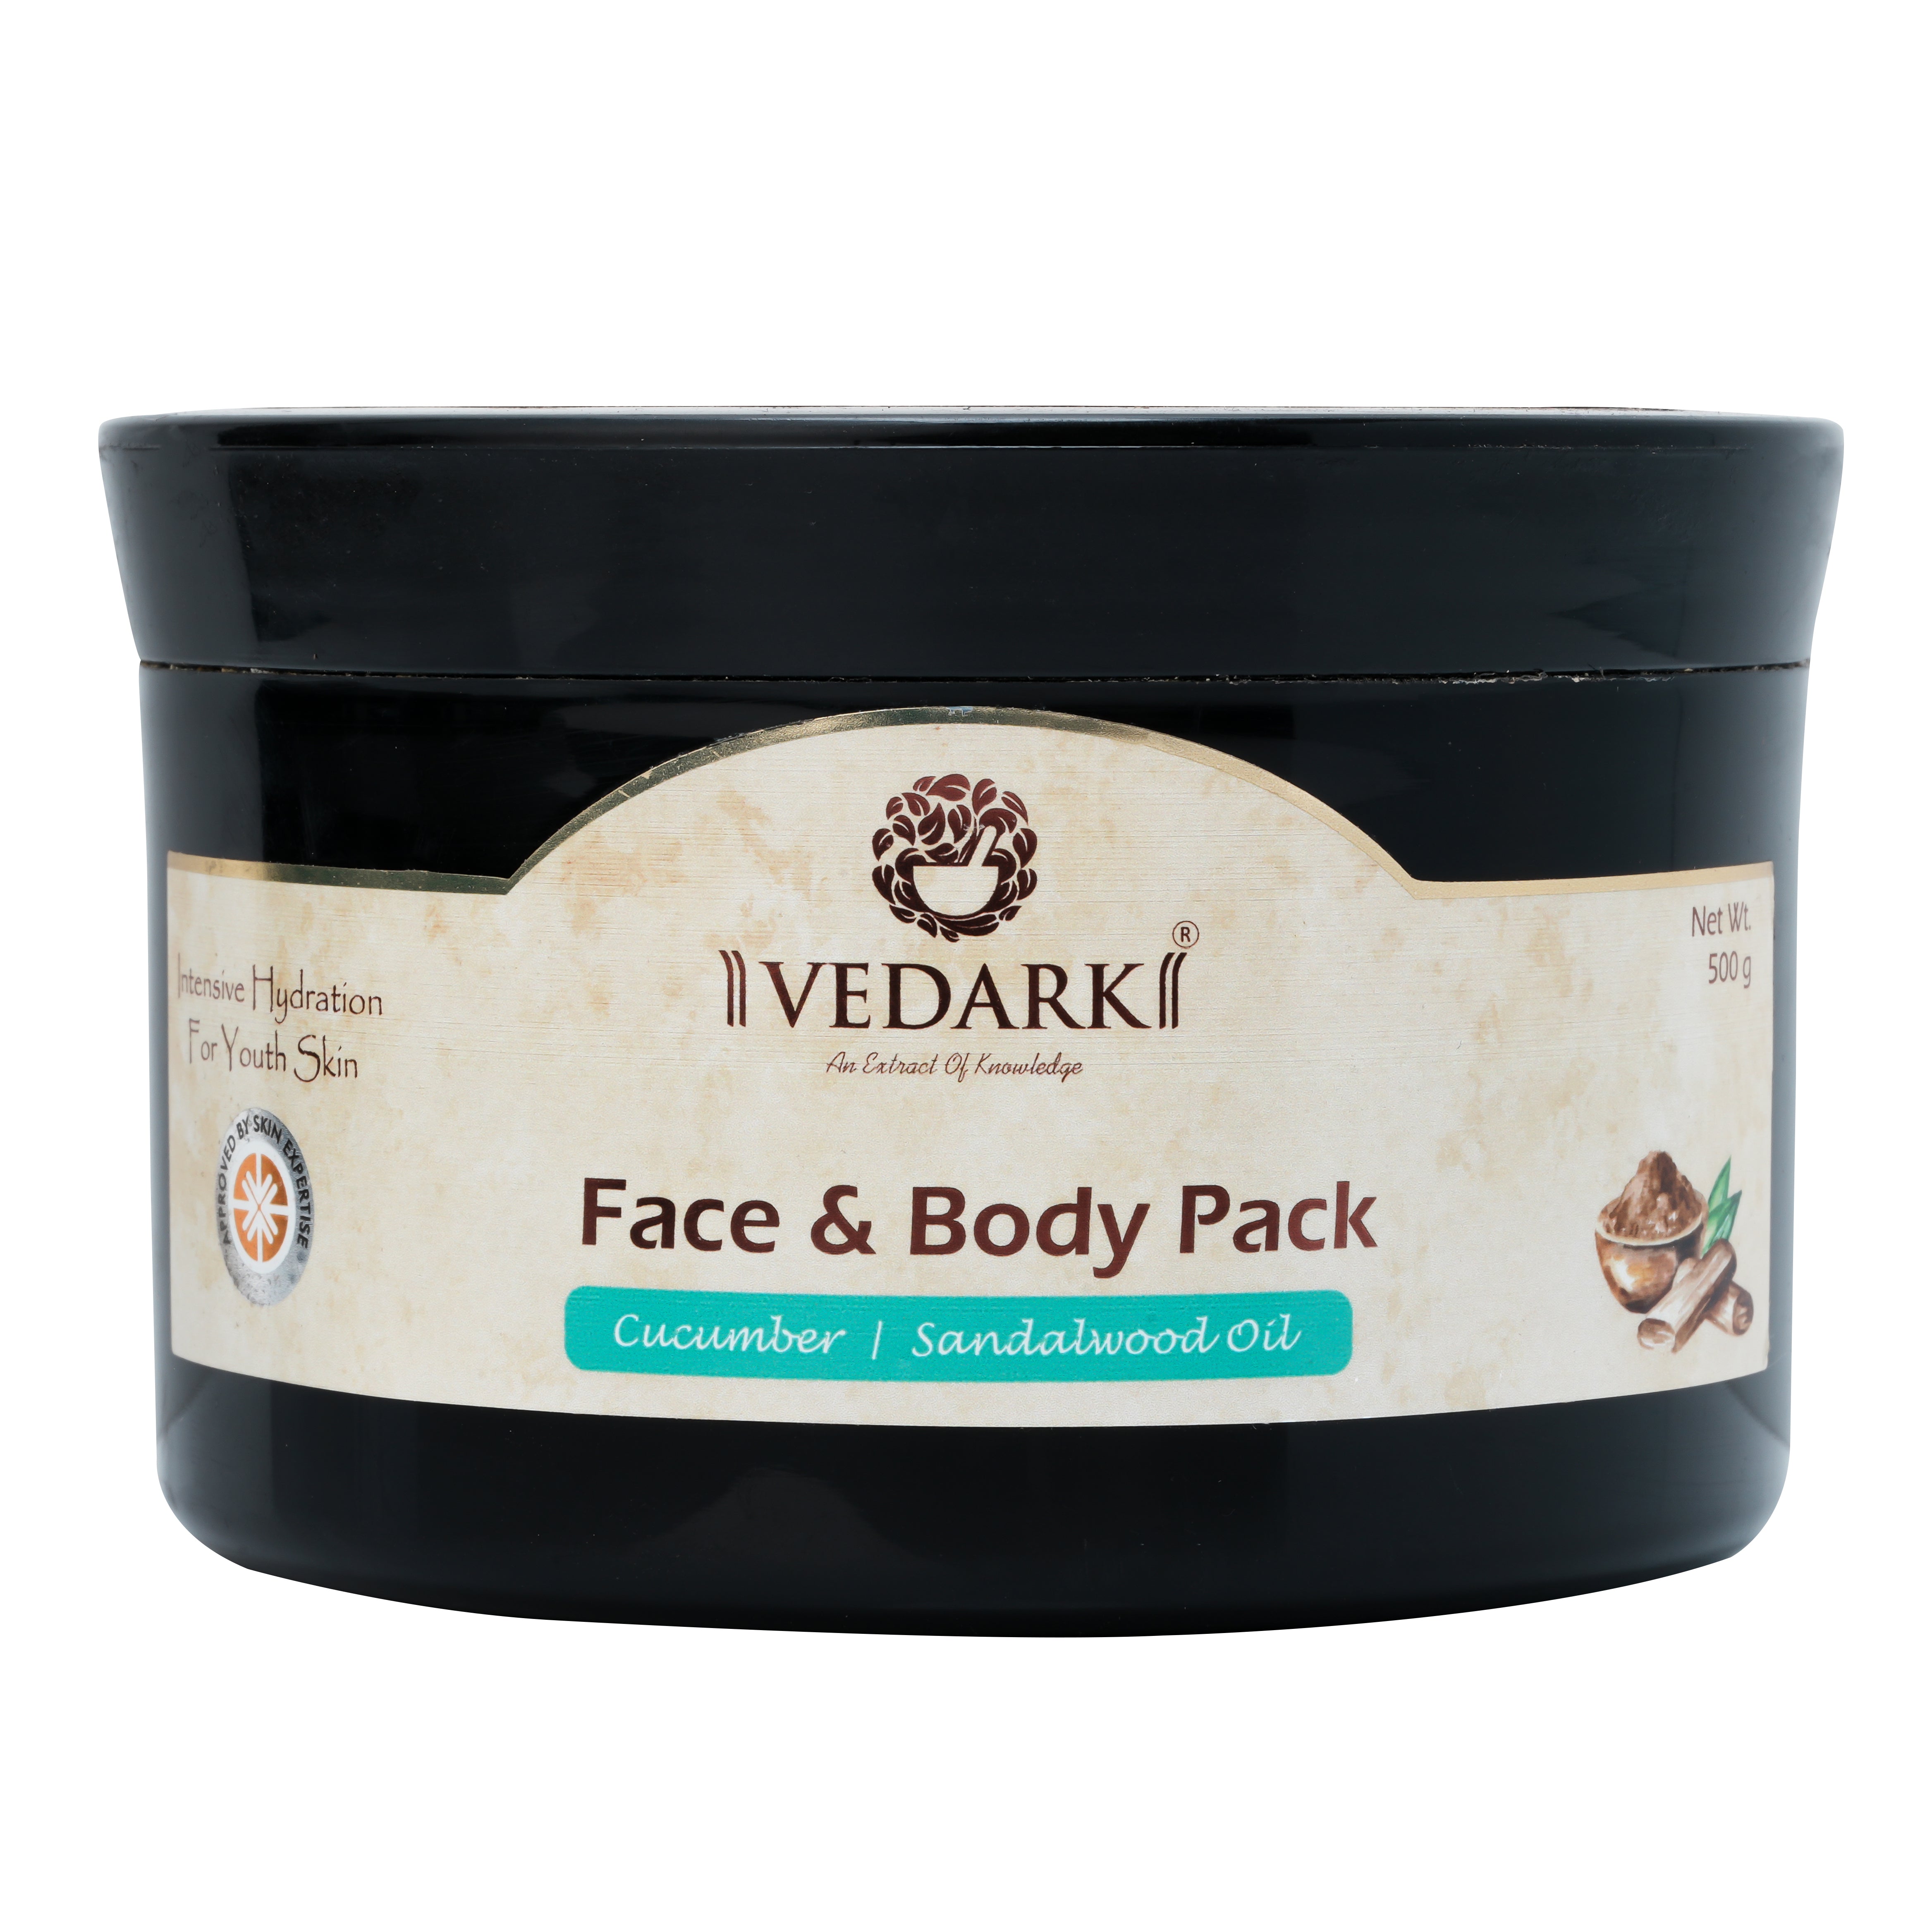 Vedark Face and Body Pack